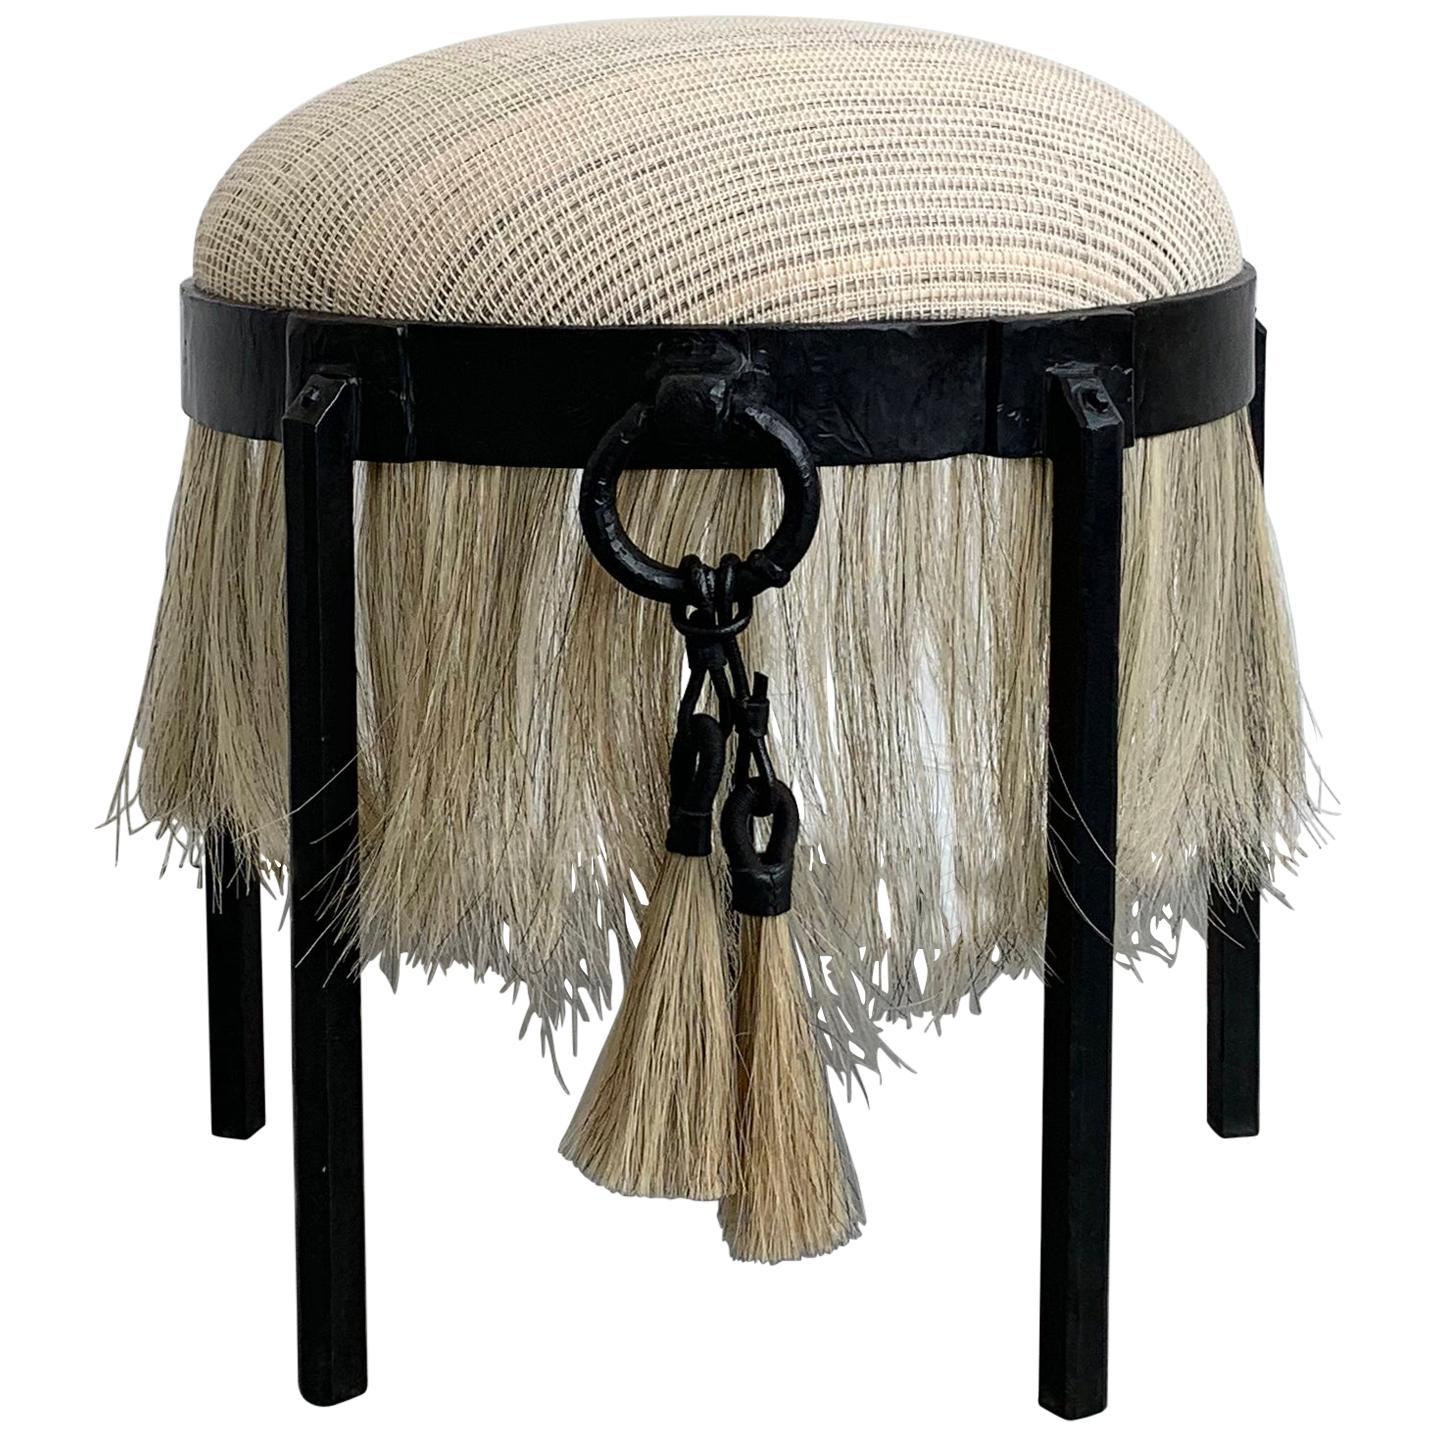 HORSE HAIR STOOL 
J.M. Szymanski
d. 2018

Contemporary furniture at its finest. Horsehair textile and blackened iron are combined to create an exciting juxtaposition of elements. 

Available in creme, brown, and black. Custom sizes available. Made